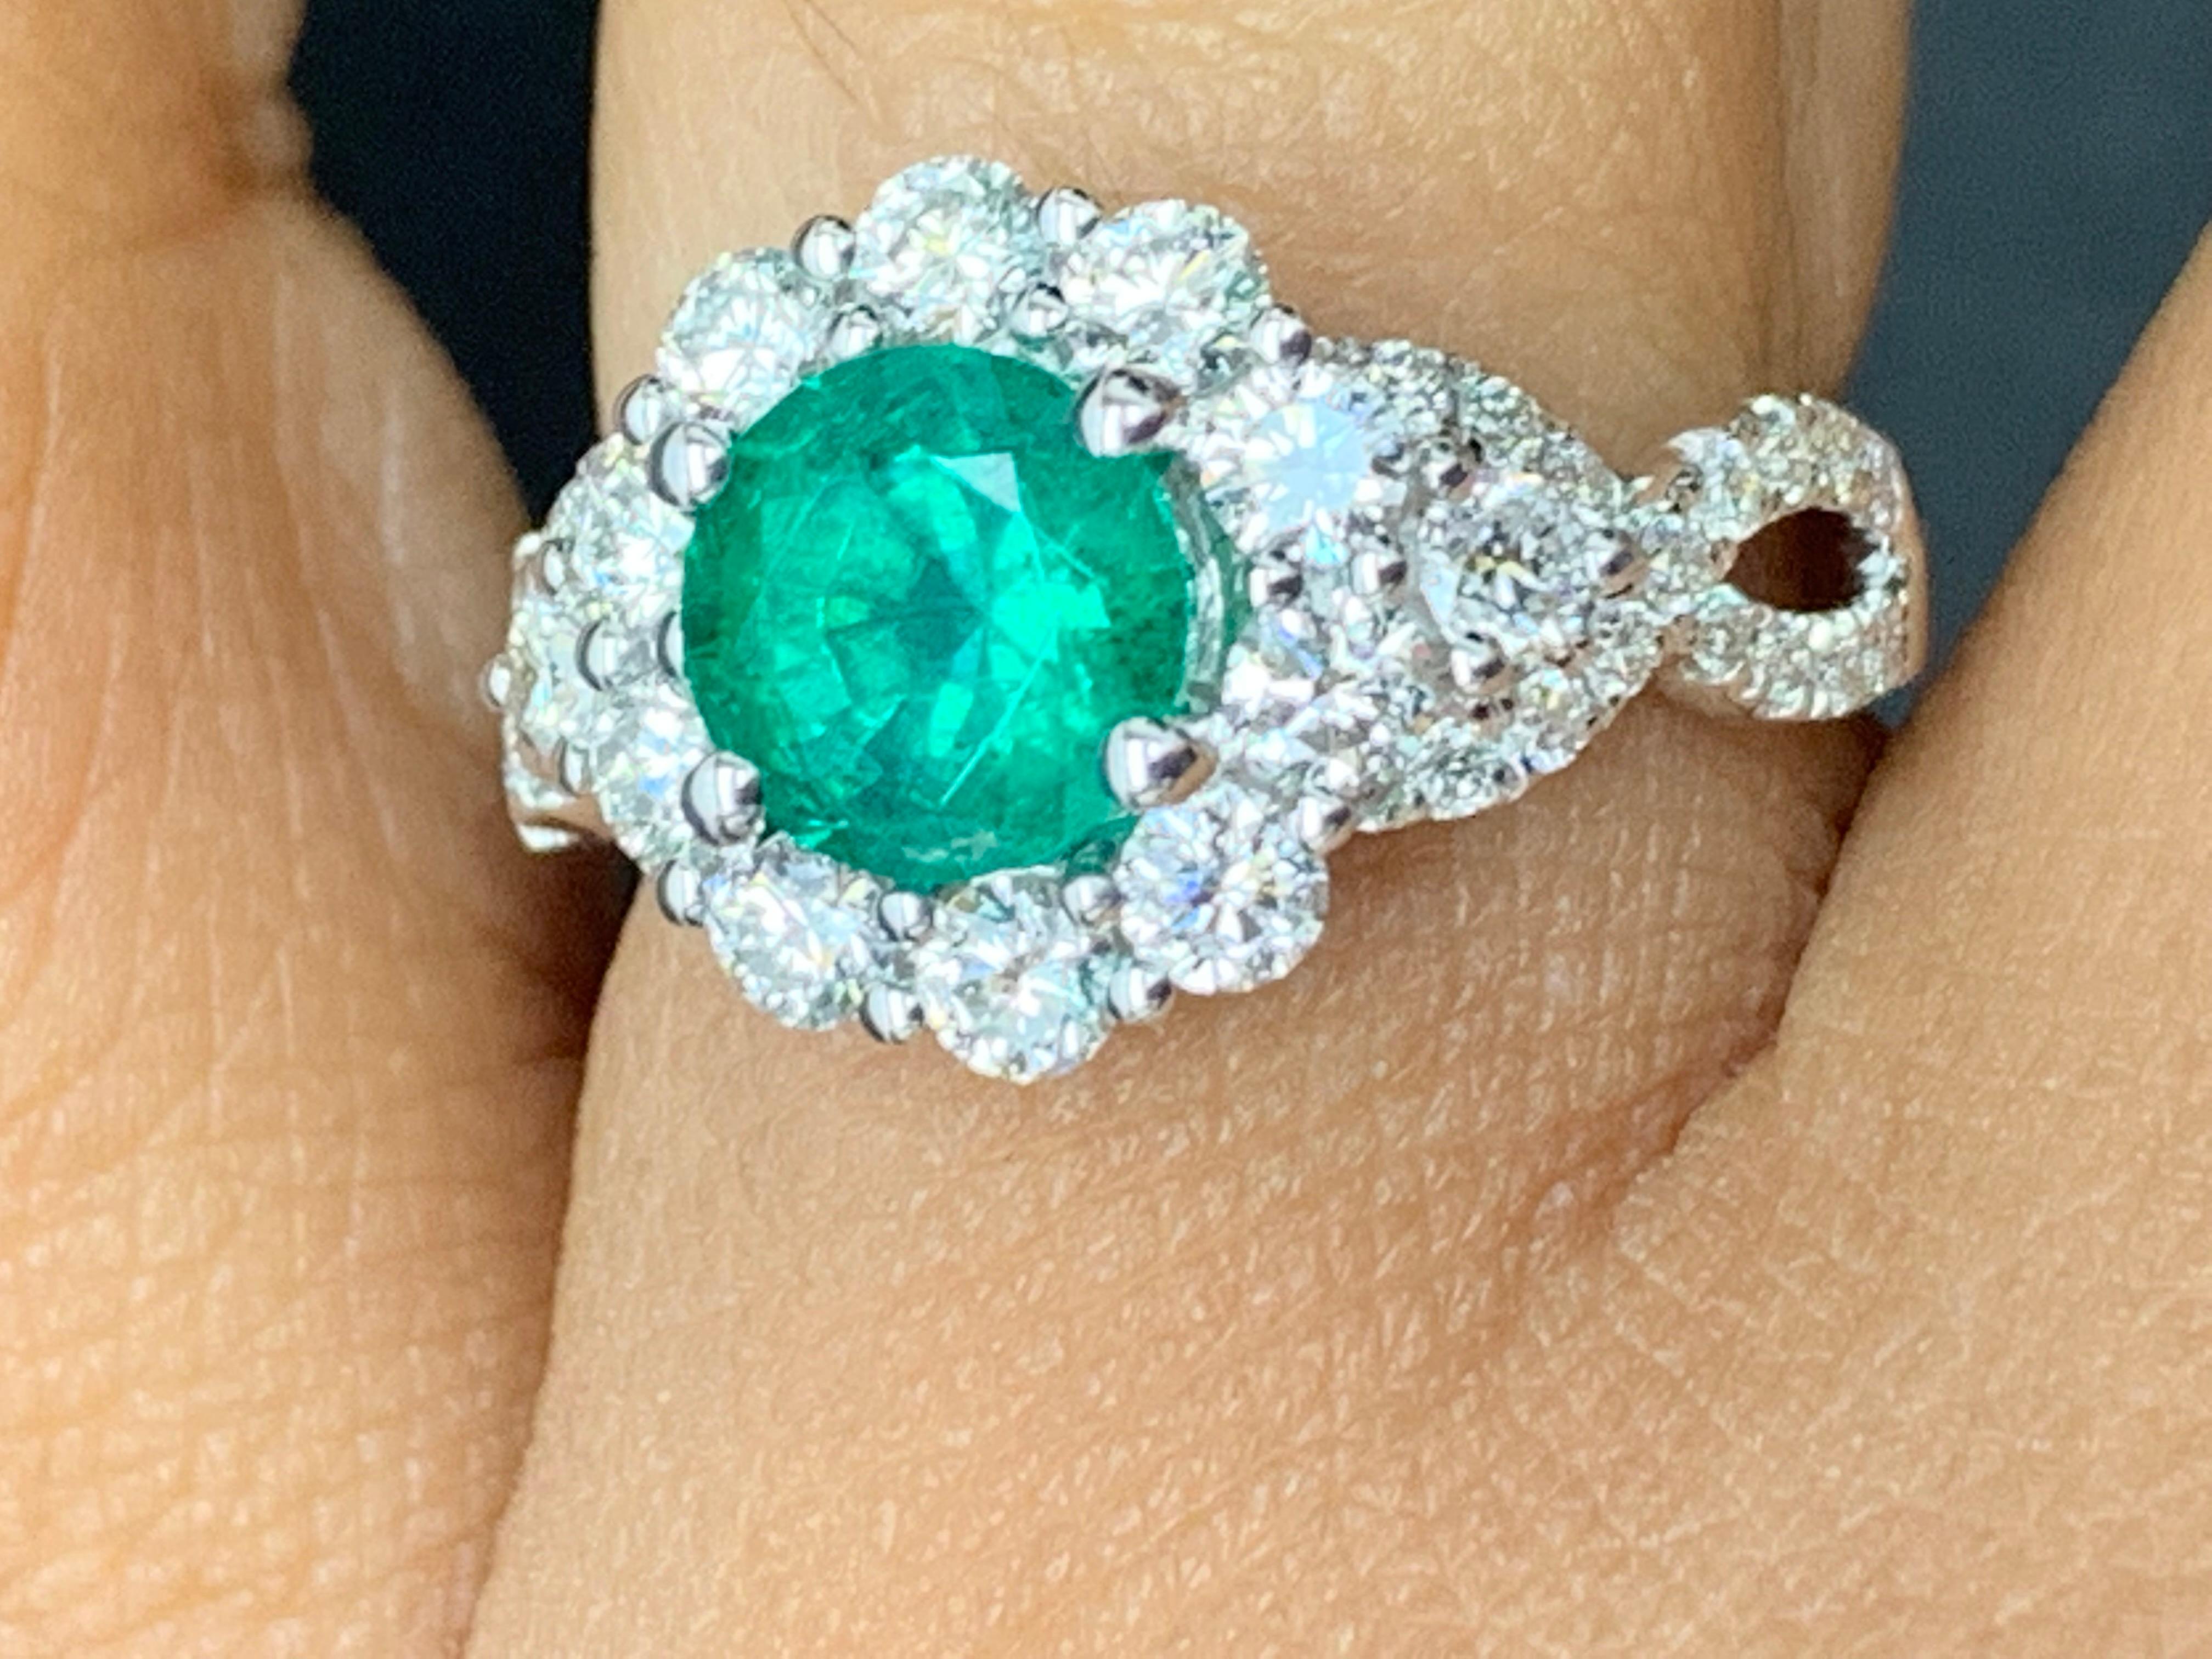 Features a gorgeous flower design  1.30 carat round cut lush green emerald ring surrounded by a row of brilliant-cut 12 diamonds weighing 0.88 carats in total. Embellished with two cris cross rows of round cut diamonds. Made in 18k white gold.